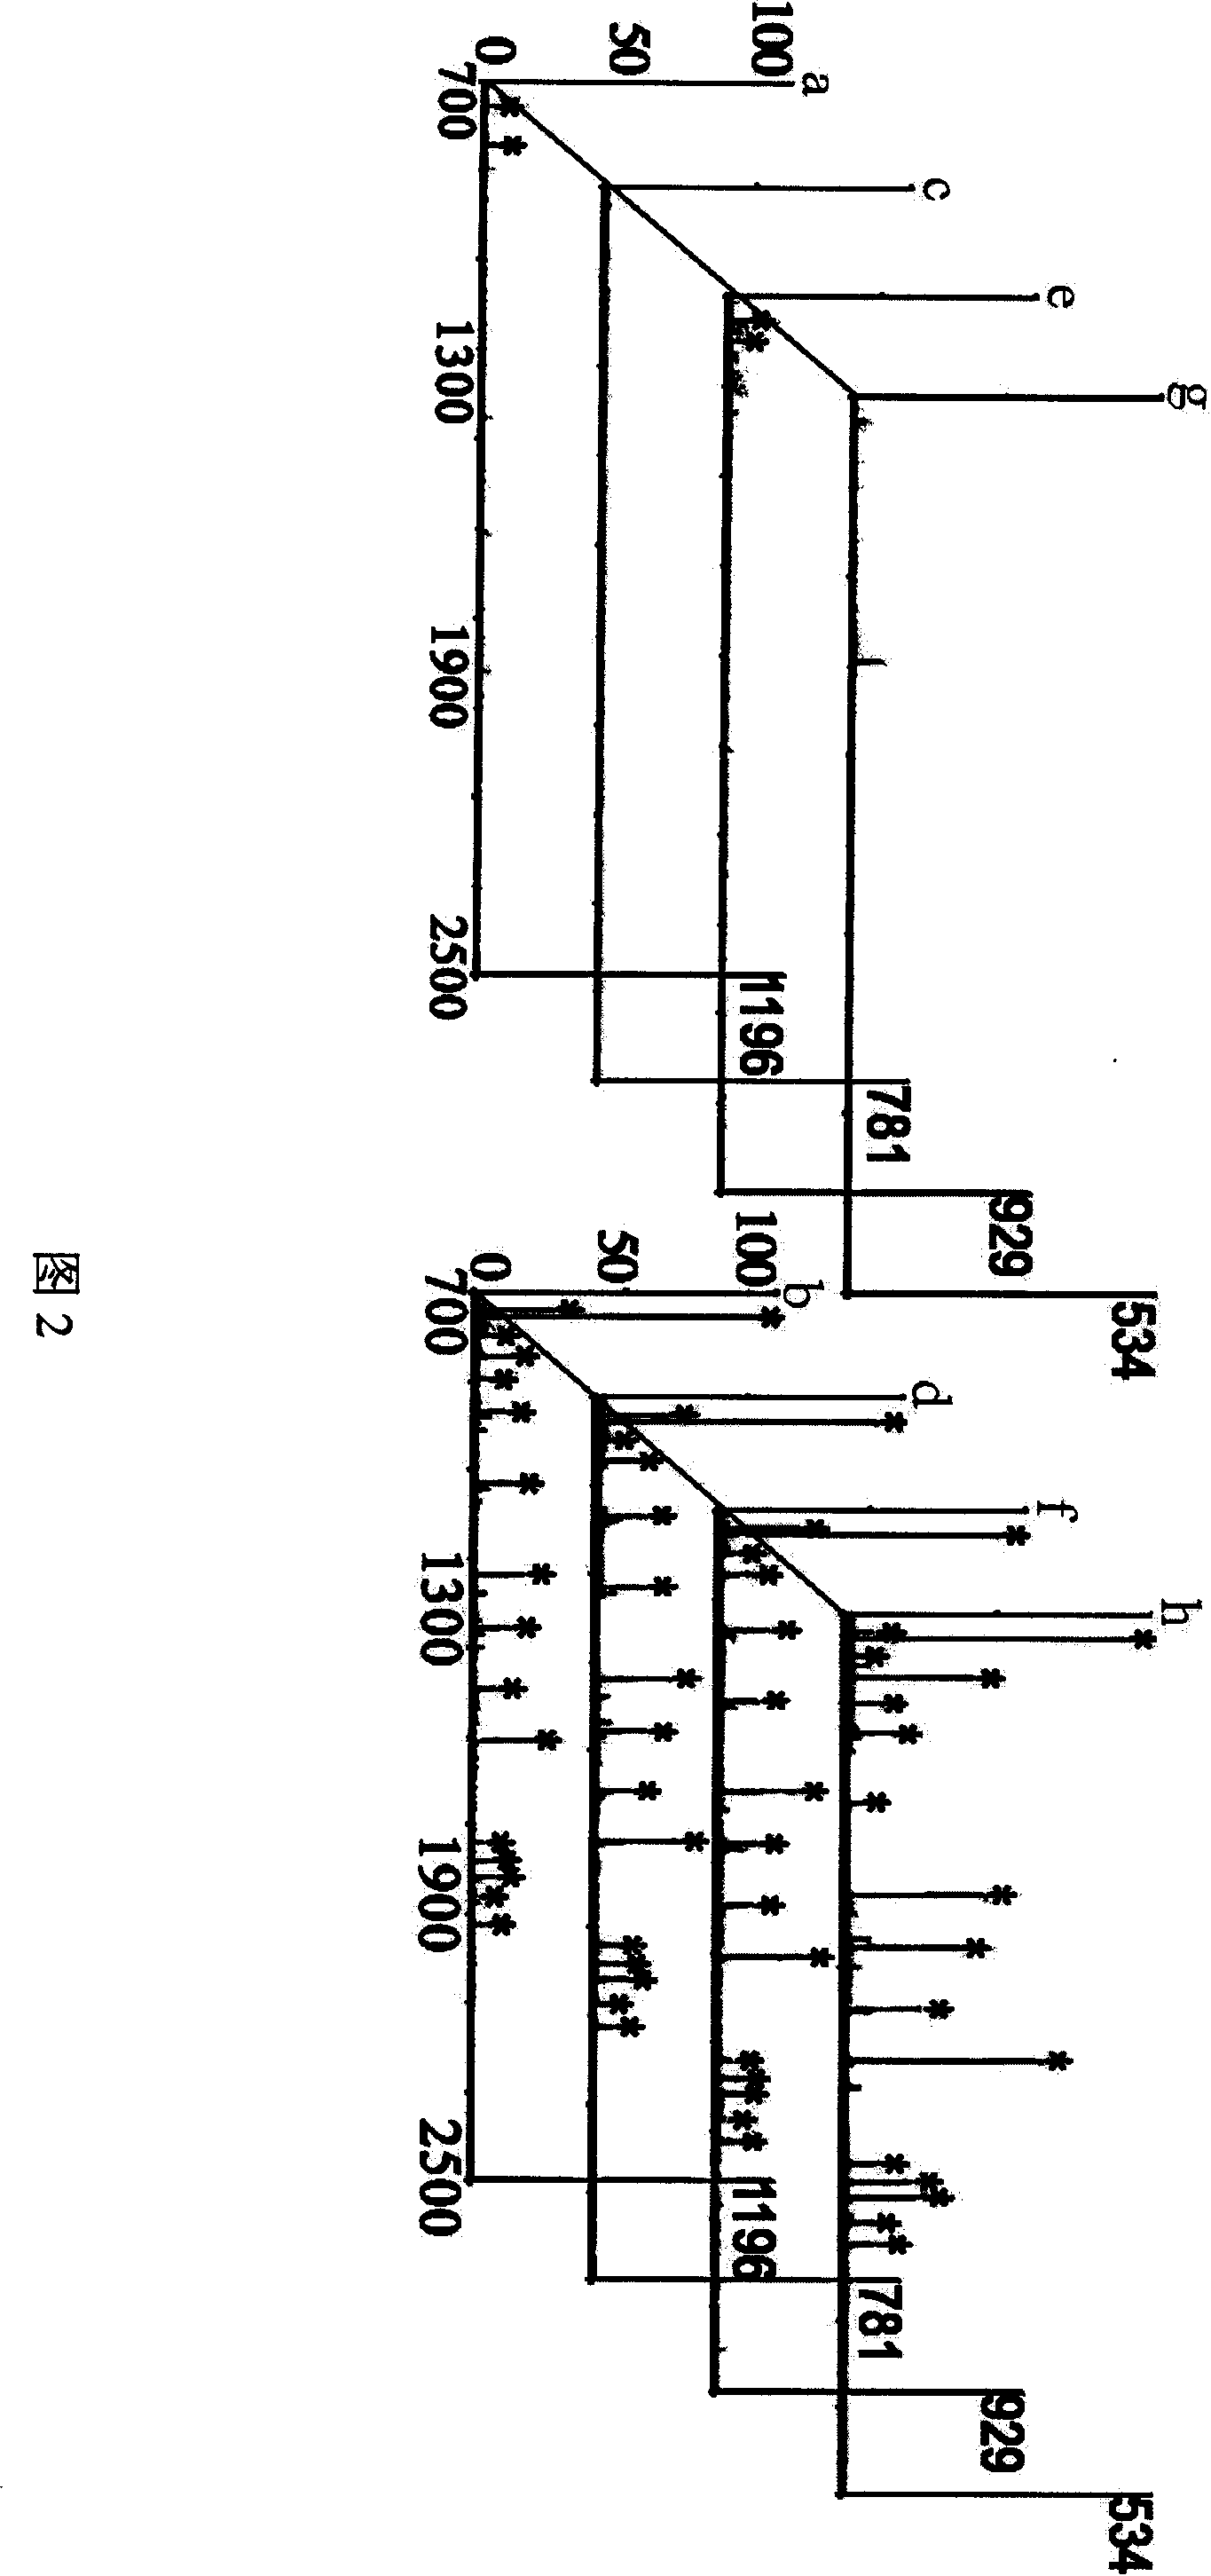 Method for in-situ desalination and enrichment on trace amount of protein or polypeptide target